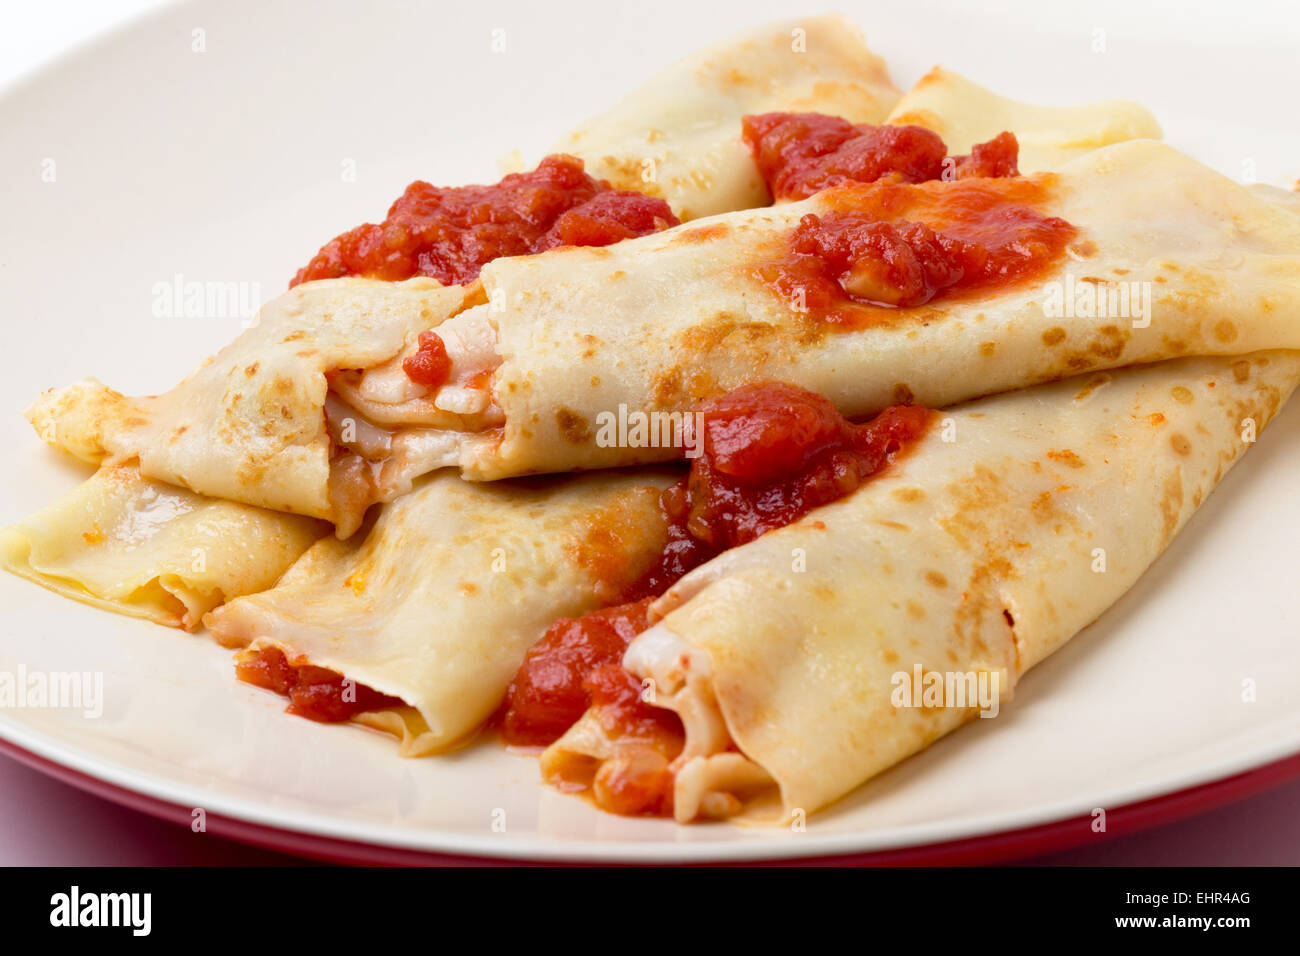 Savory pancakes filled with goats cheese and tomato salsa and garnished with more sauce. Stock Photo